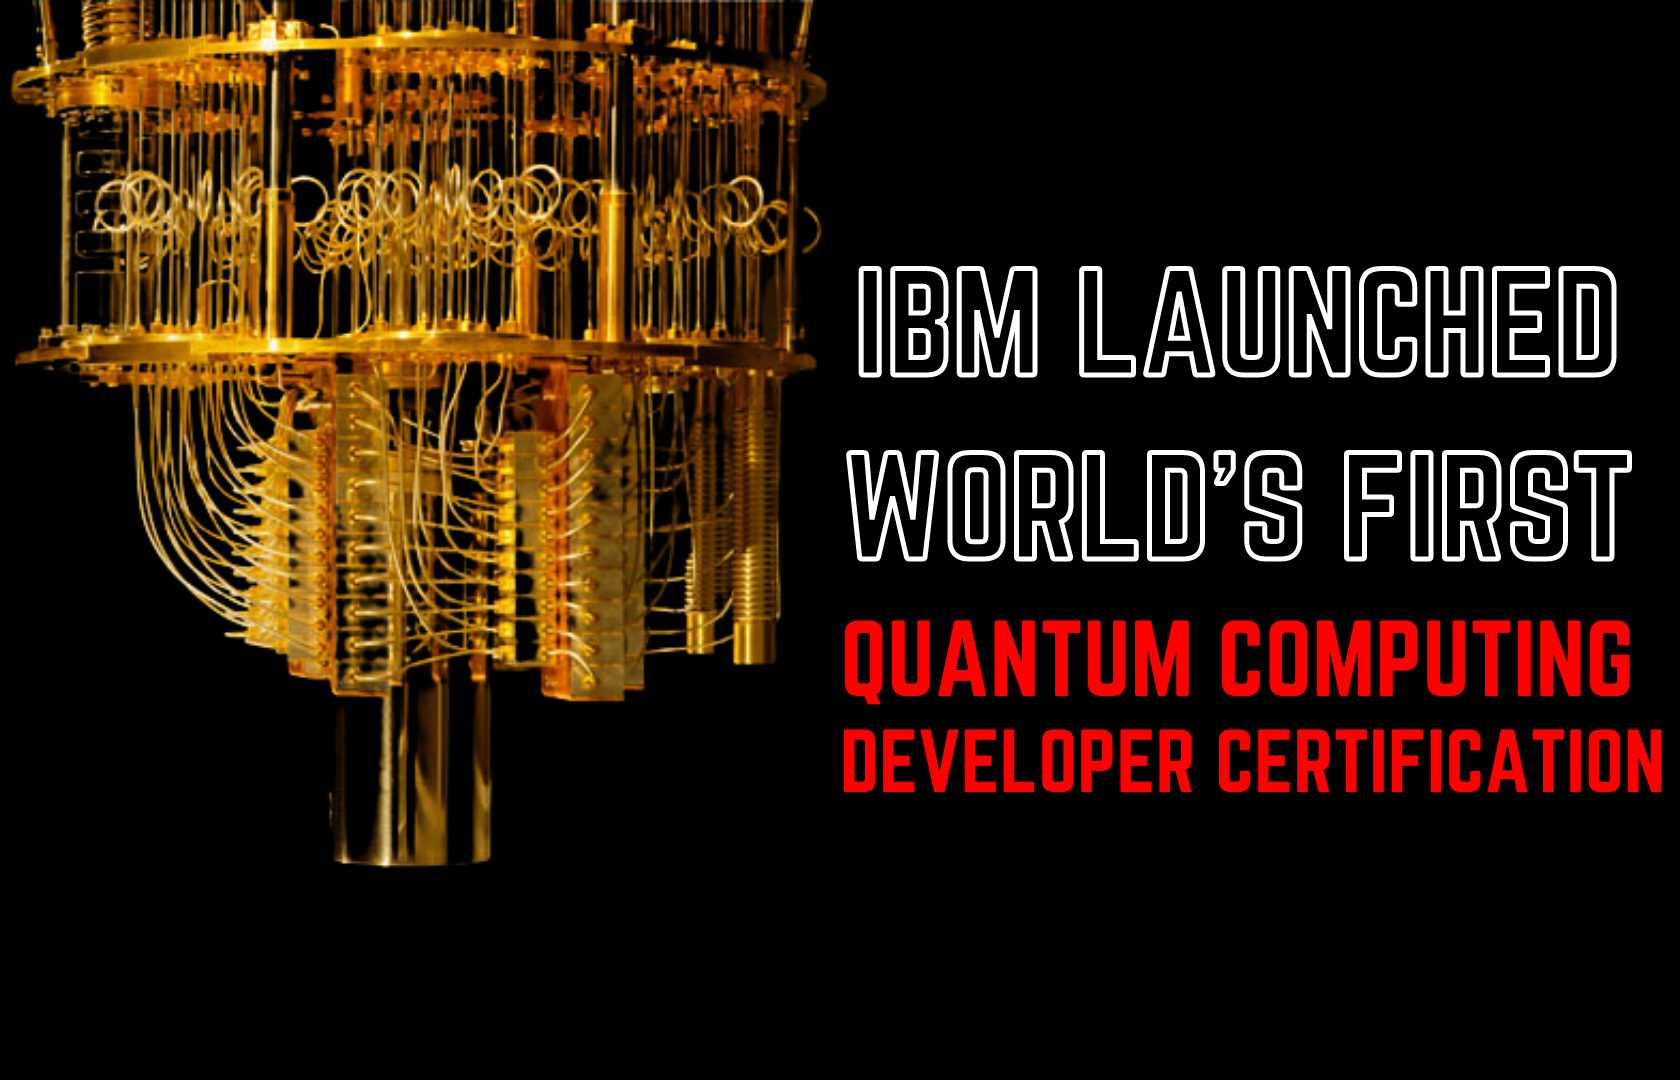 IBM launched world first quantum computing developer certification, IBM quantum computing developer certification test sample